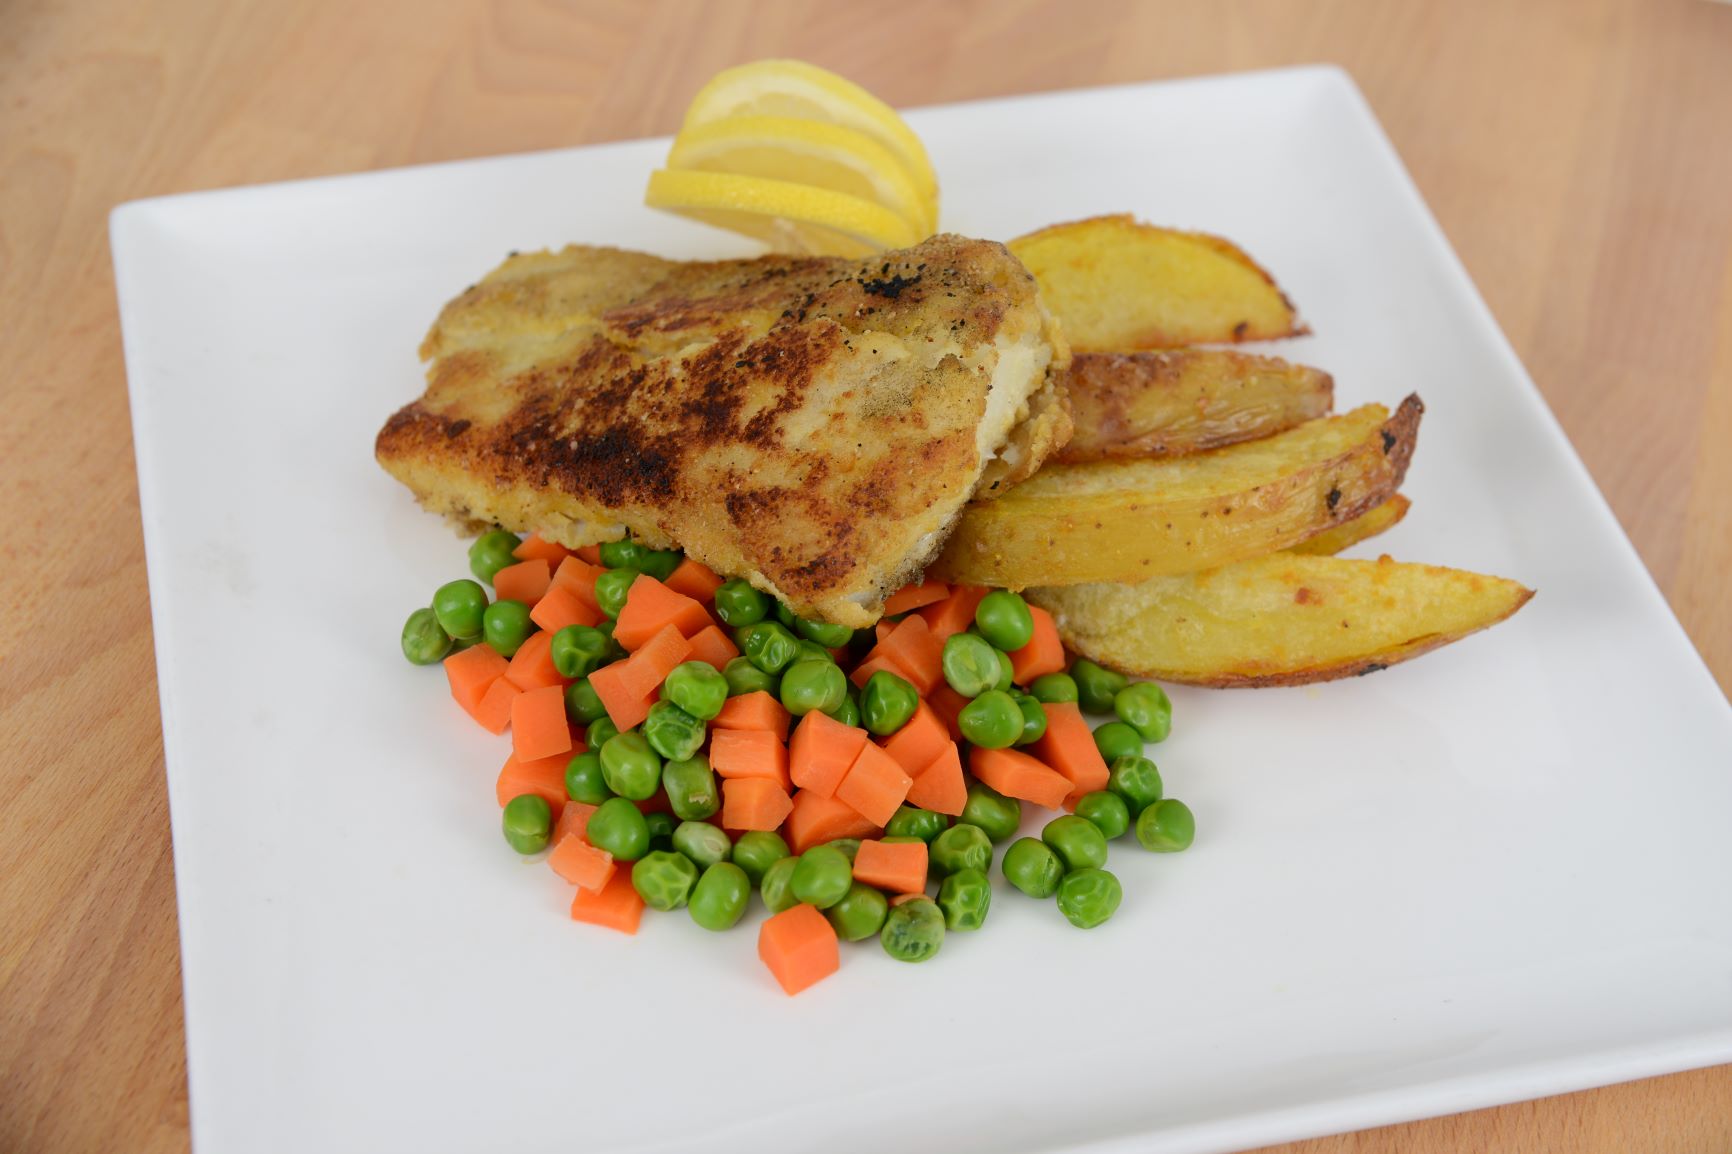 Gluten Free Cobia & Chips (Monday 5/13 Delivery)